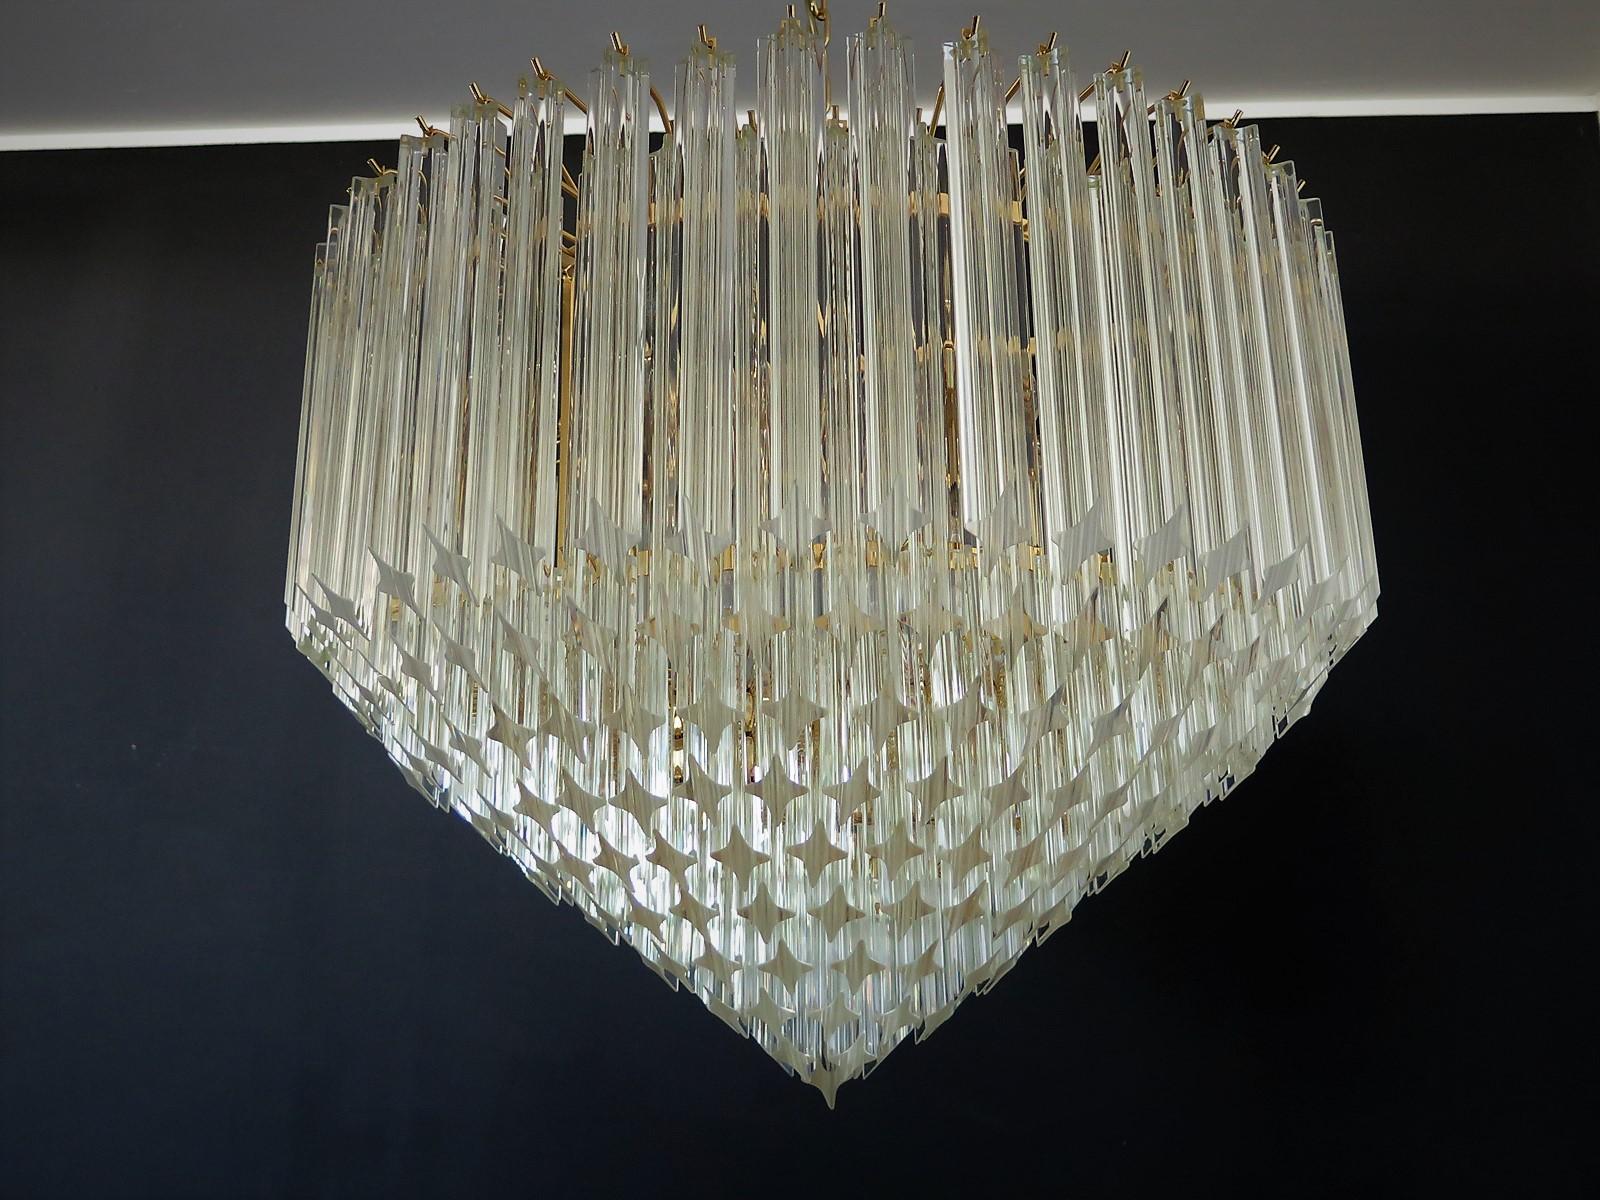 A magnificent Murano glass chandelier, 265 quadriedri on gold frame. This large Mid-Century Italian chandelier is truly a timeless Classic. New product, prompt delivery.
Period: Current production
Dimensions: 57.10 inches (145 cm) height with